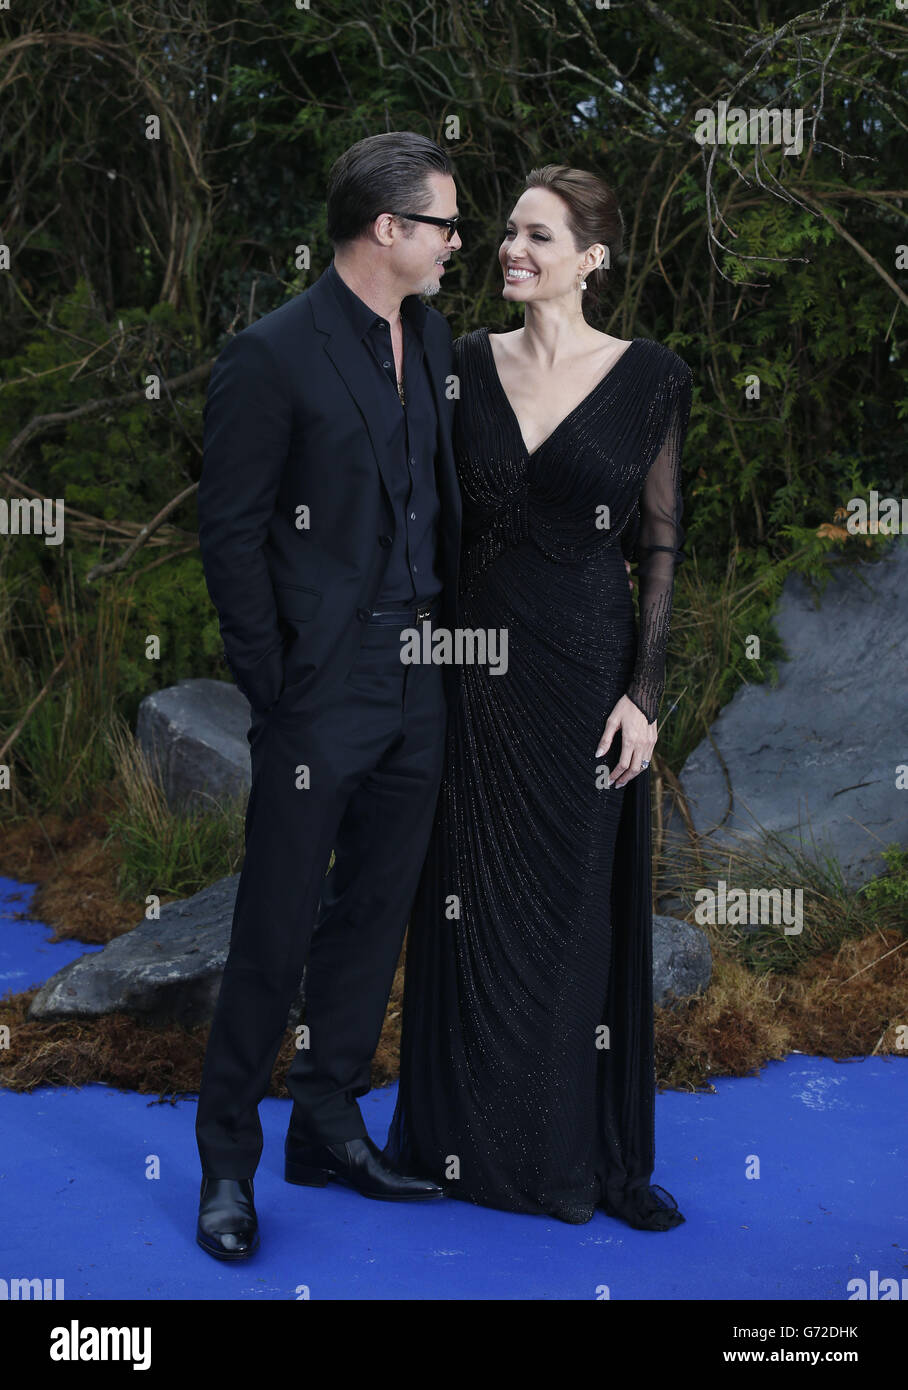 Brad Pitt and Angelina Jolie attending the premiere of Maleficent at Kensington Palace, London. Stock Photo